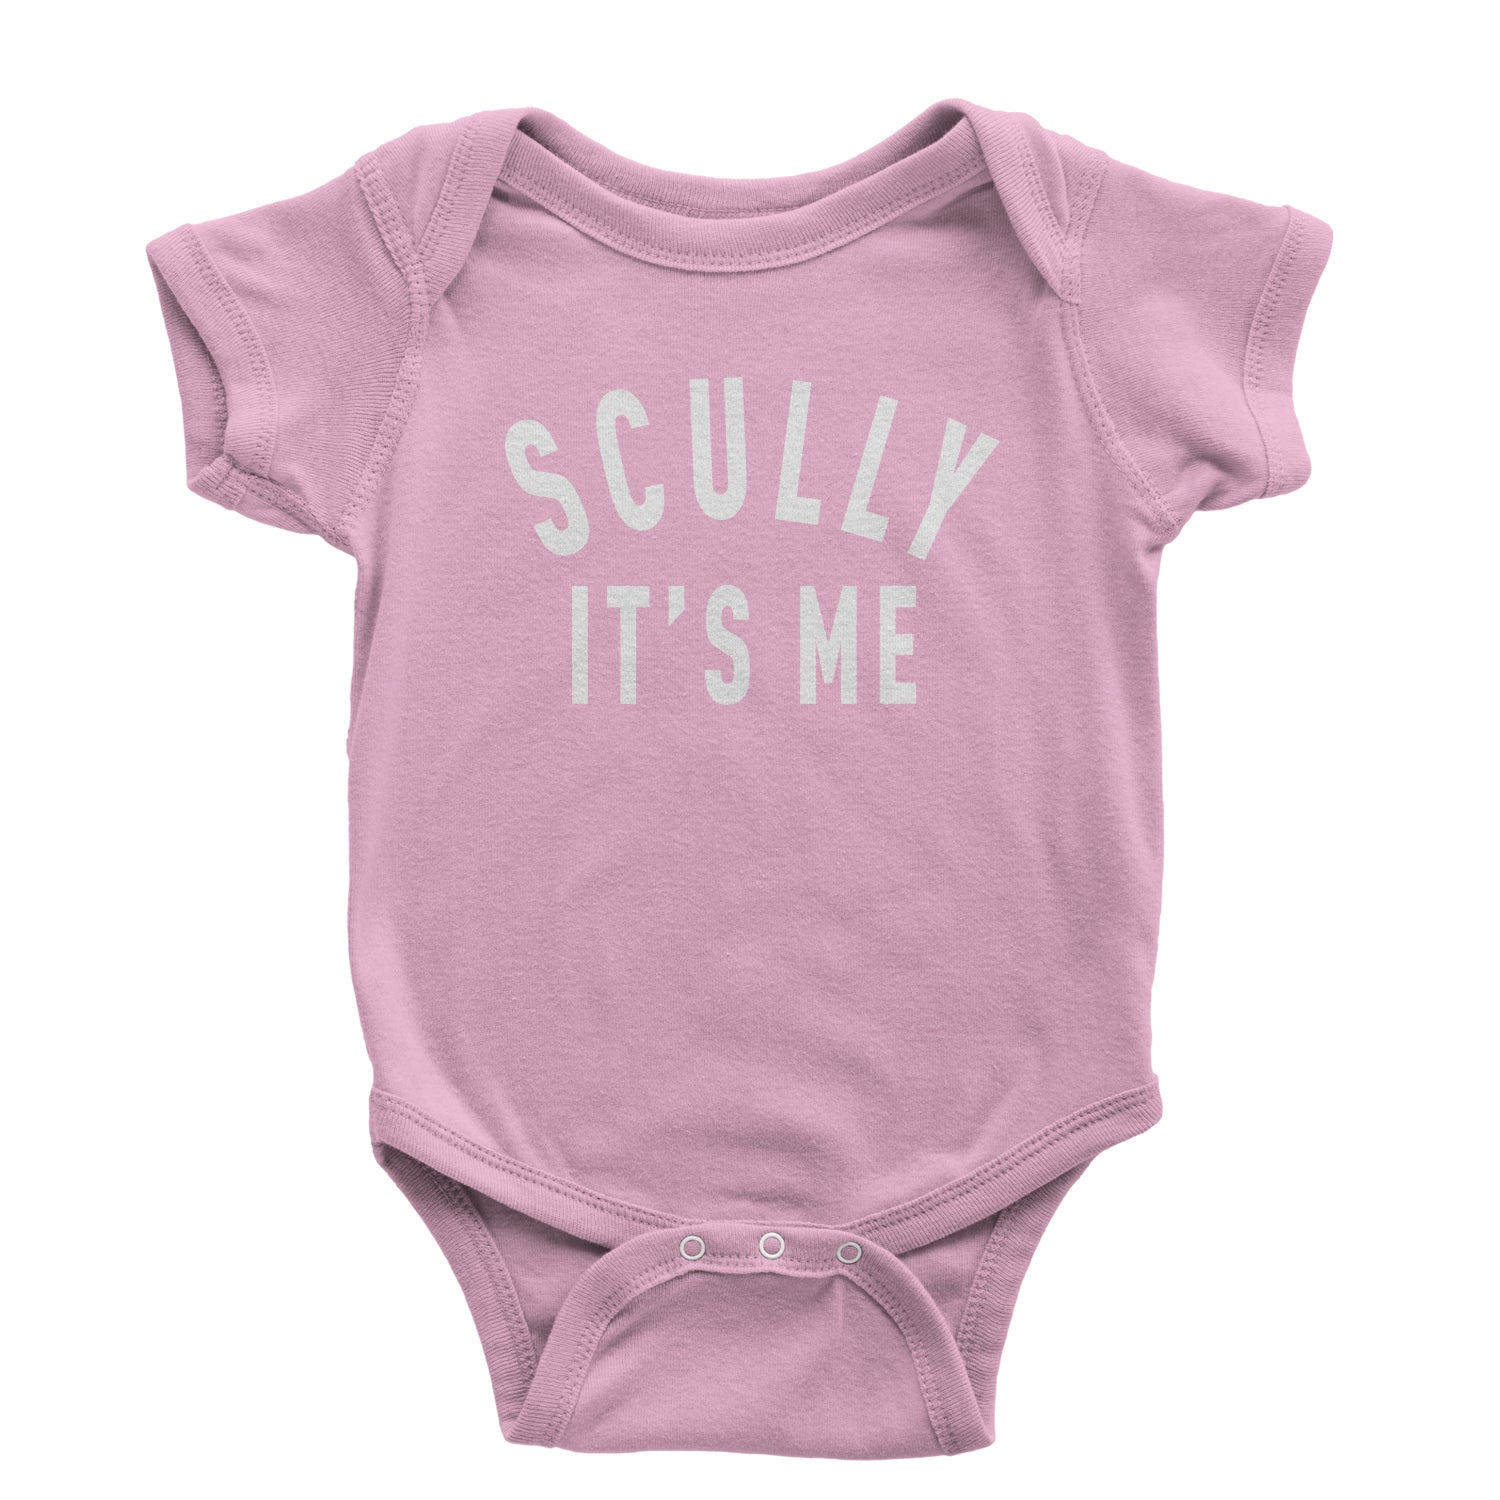 Scully, It's Me Infant One-Piece Romper Bodysuit and Toddler T-shirt #expressiontees by Expression Tees